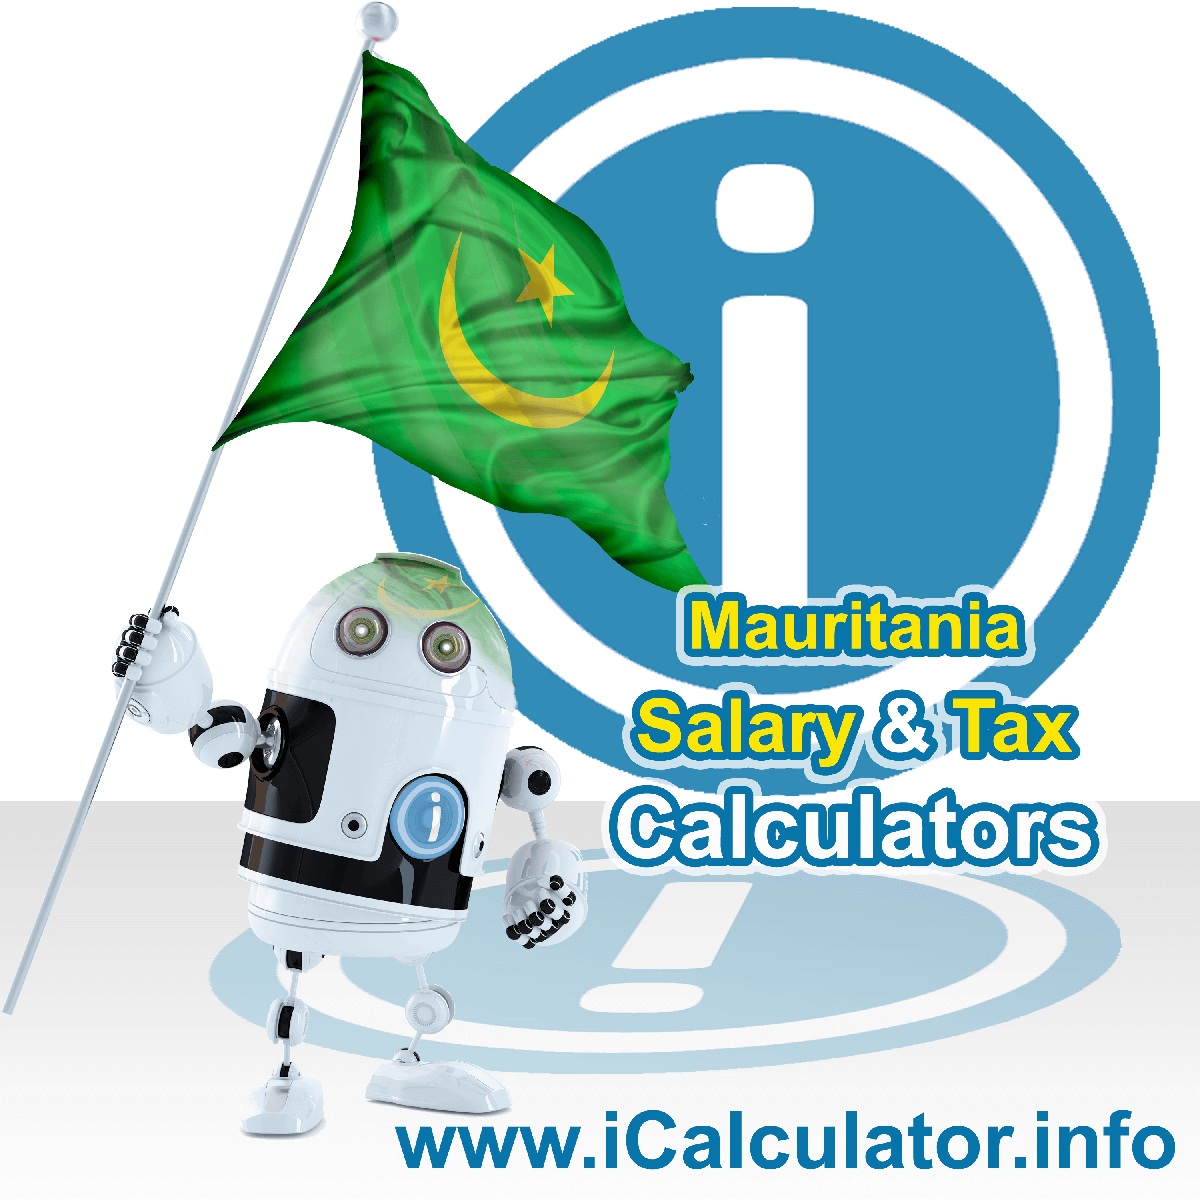 Mauritania Salary Calculator. This image shows the Mauritaniaese flag and information relating to the tax formula for the Mauritania Tax Calculator